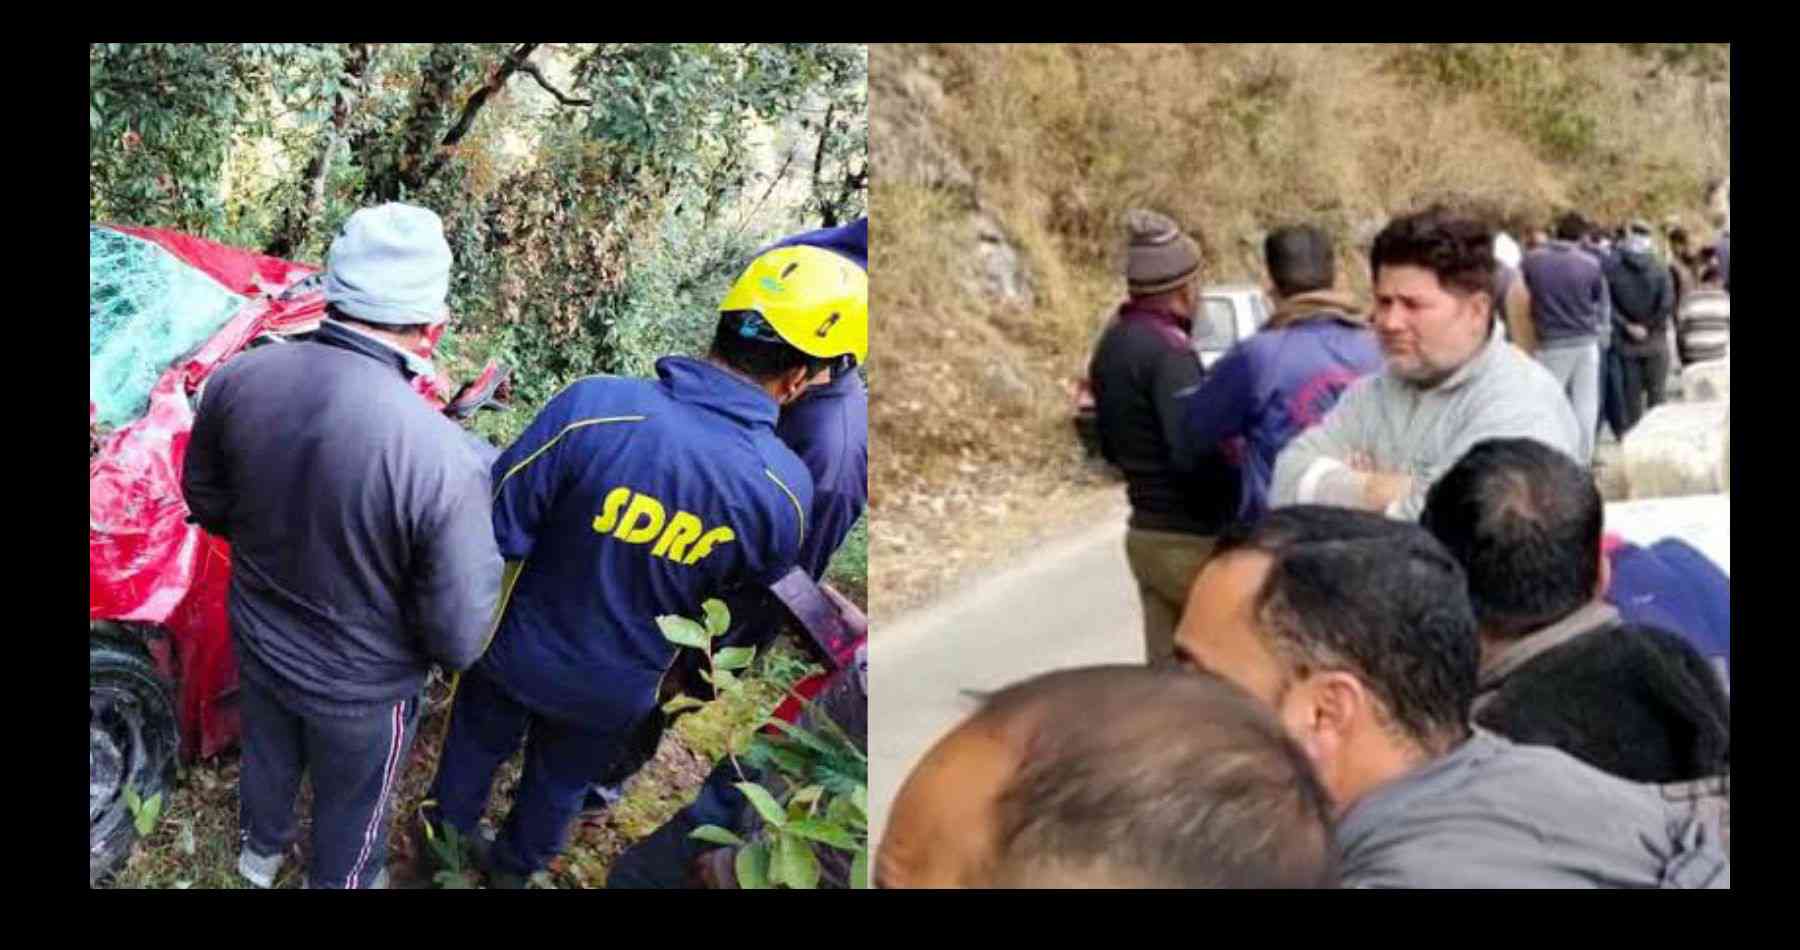 Uttarakhand news: road accident in Rudraprayag, vehicle stuck in a deep ditch, two people died on the spot. Rudraprayag road accident